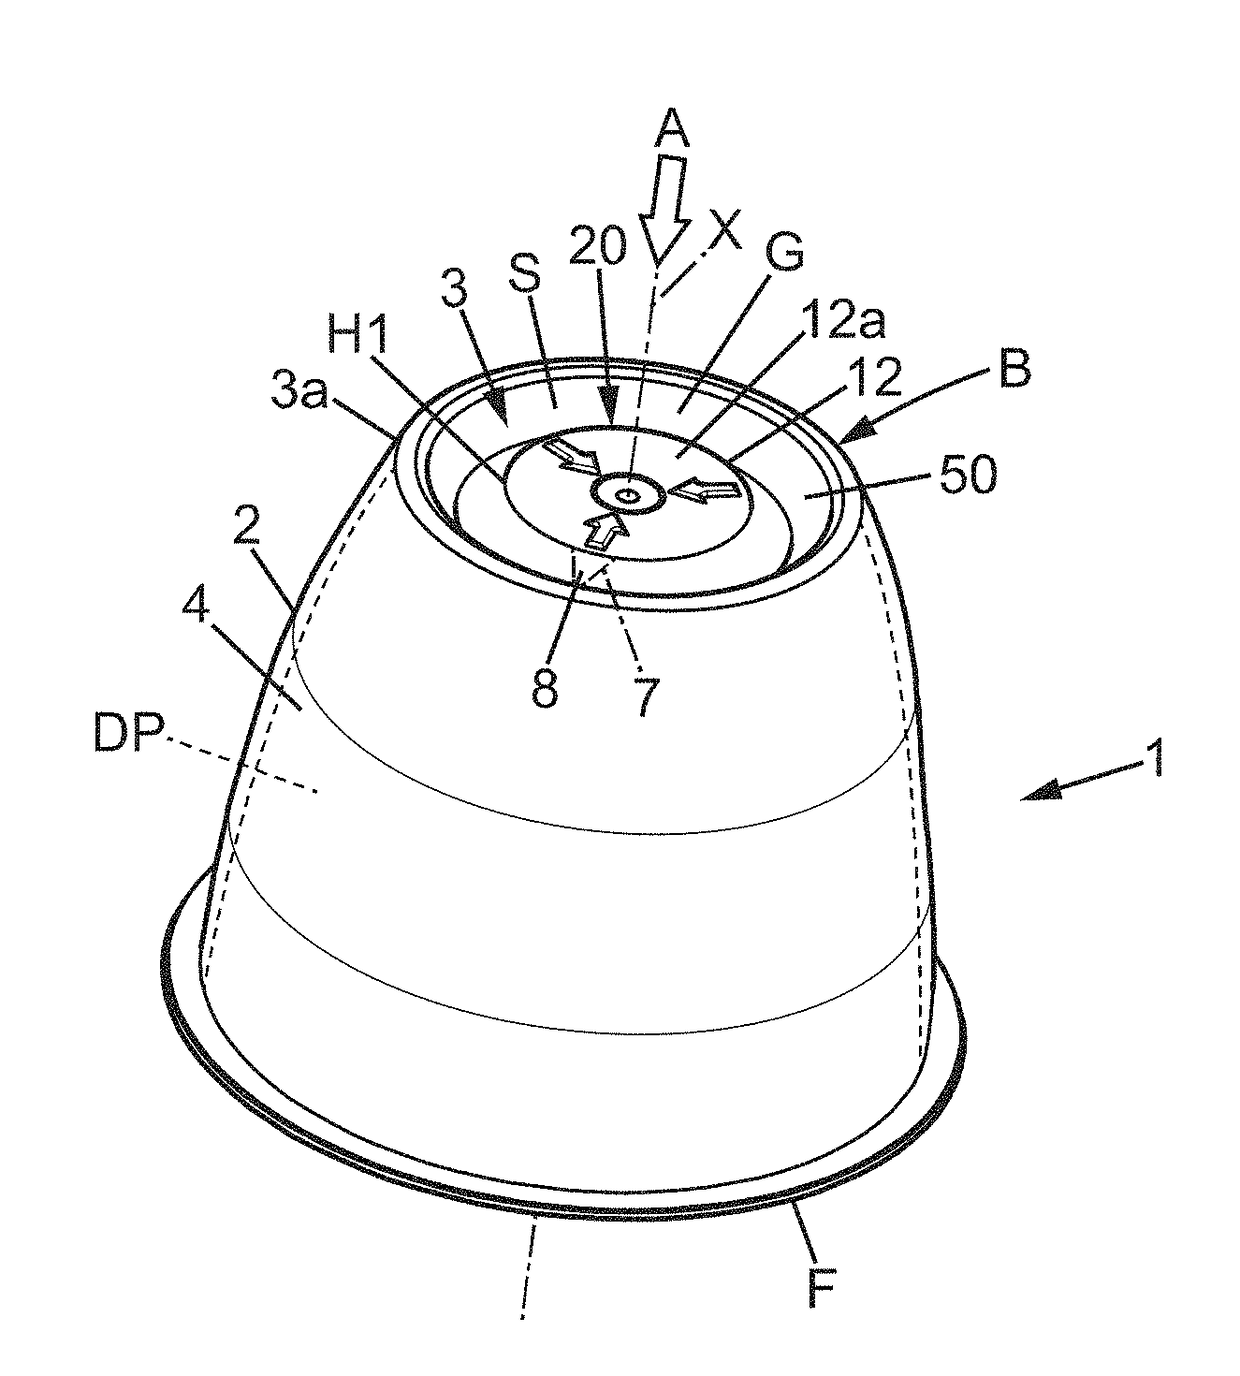 Container for food product having a manually operable actuating member